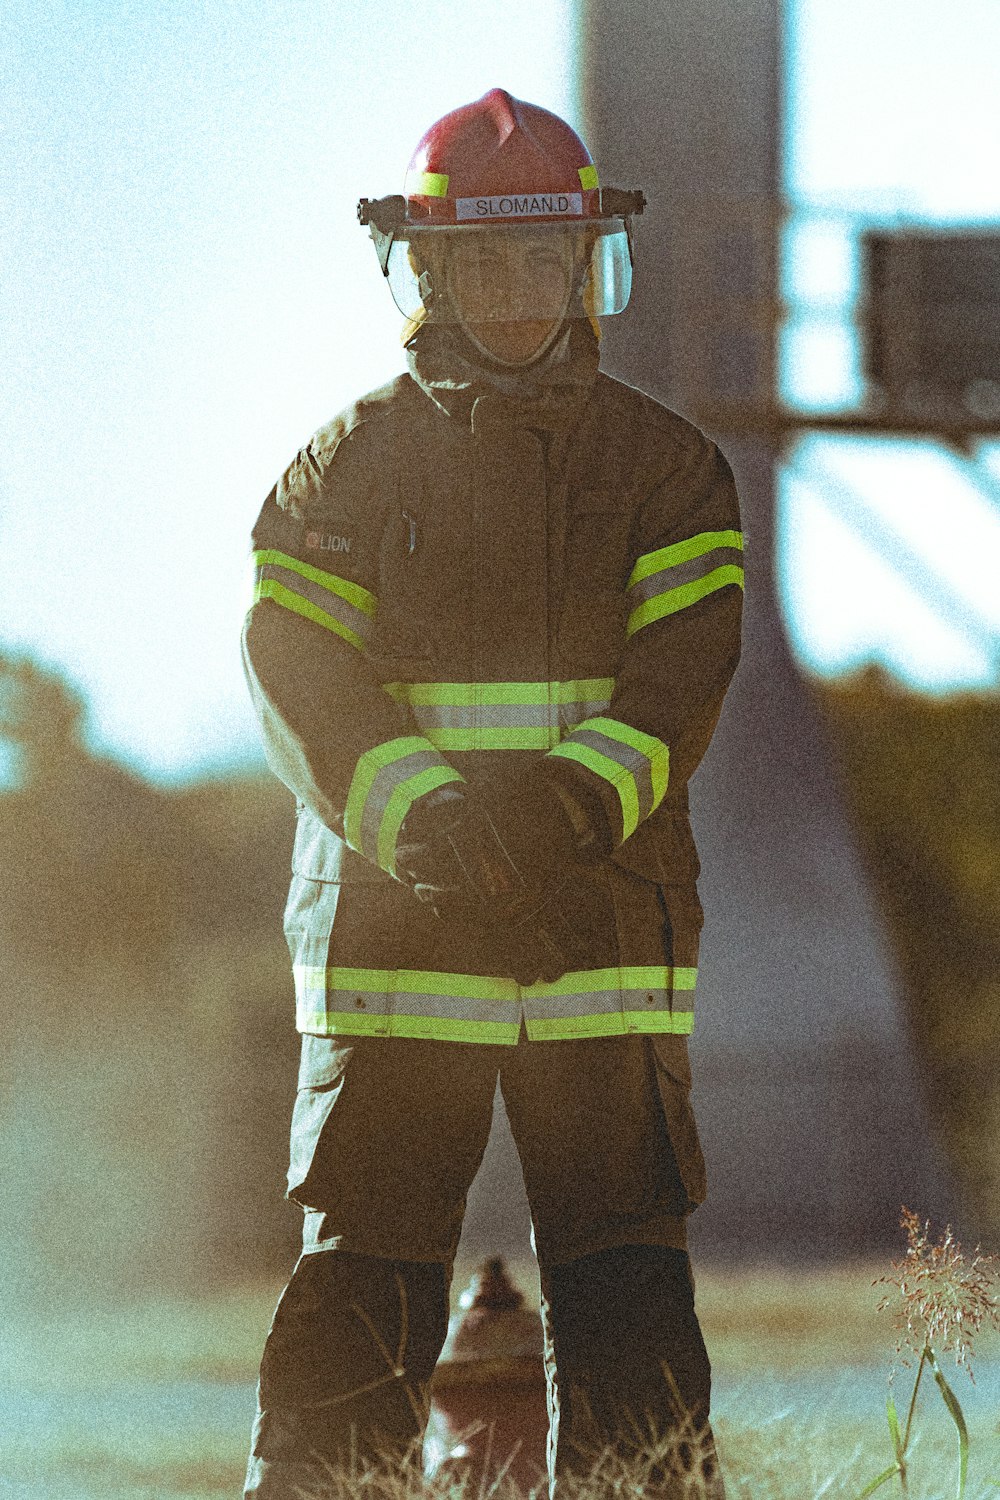 a firefighter standing in front of a fire hydrant